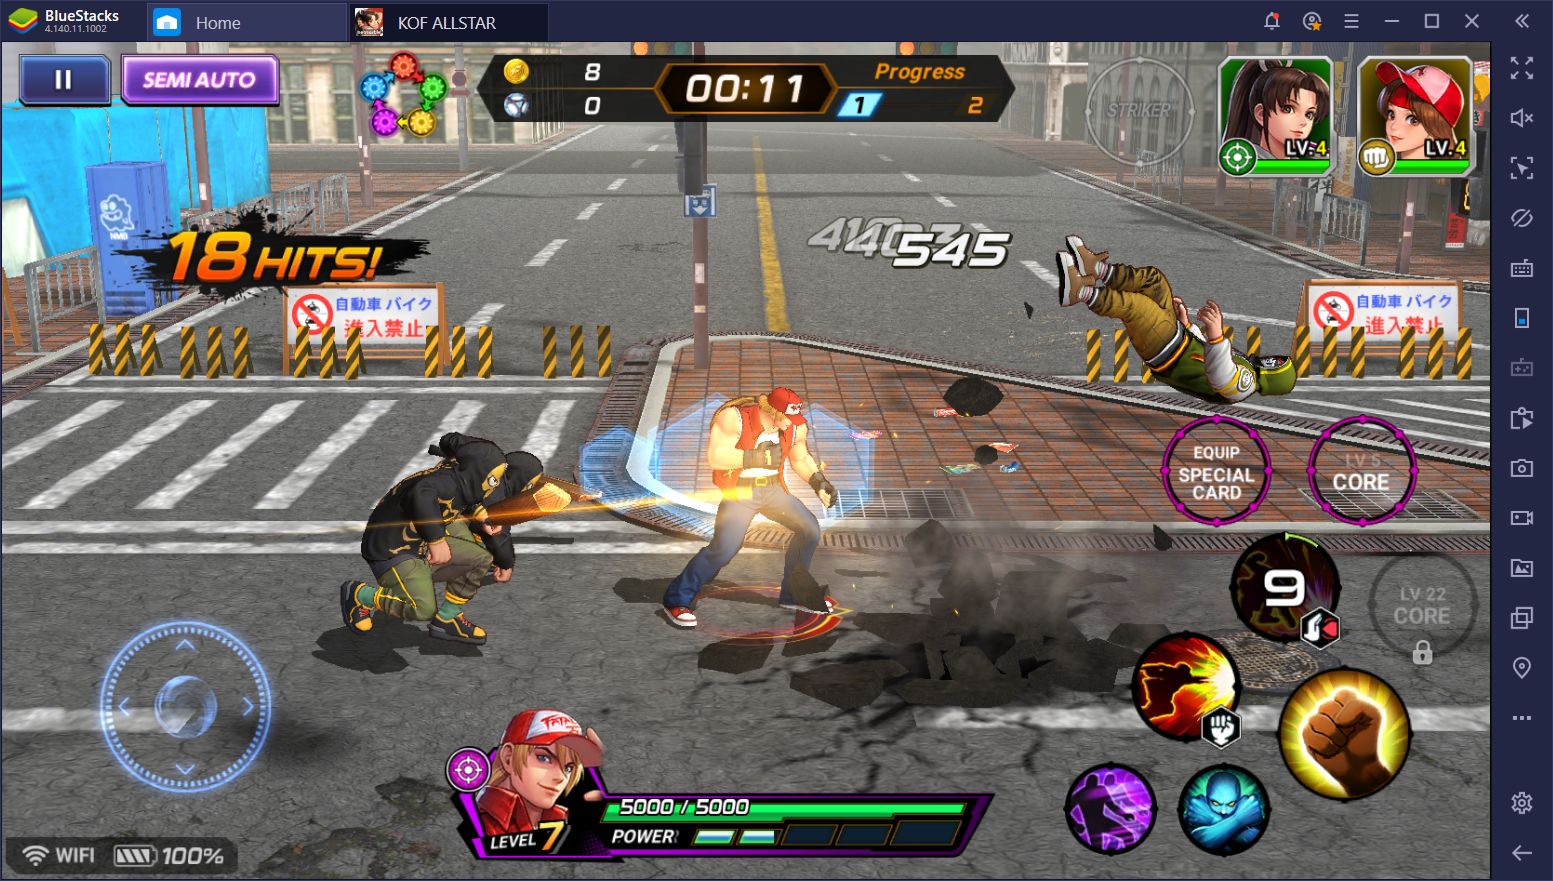 King of Fighters ALLSTAR on PC: Beat Up The Competition With These Tips and Tricks